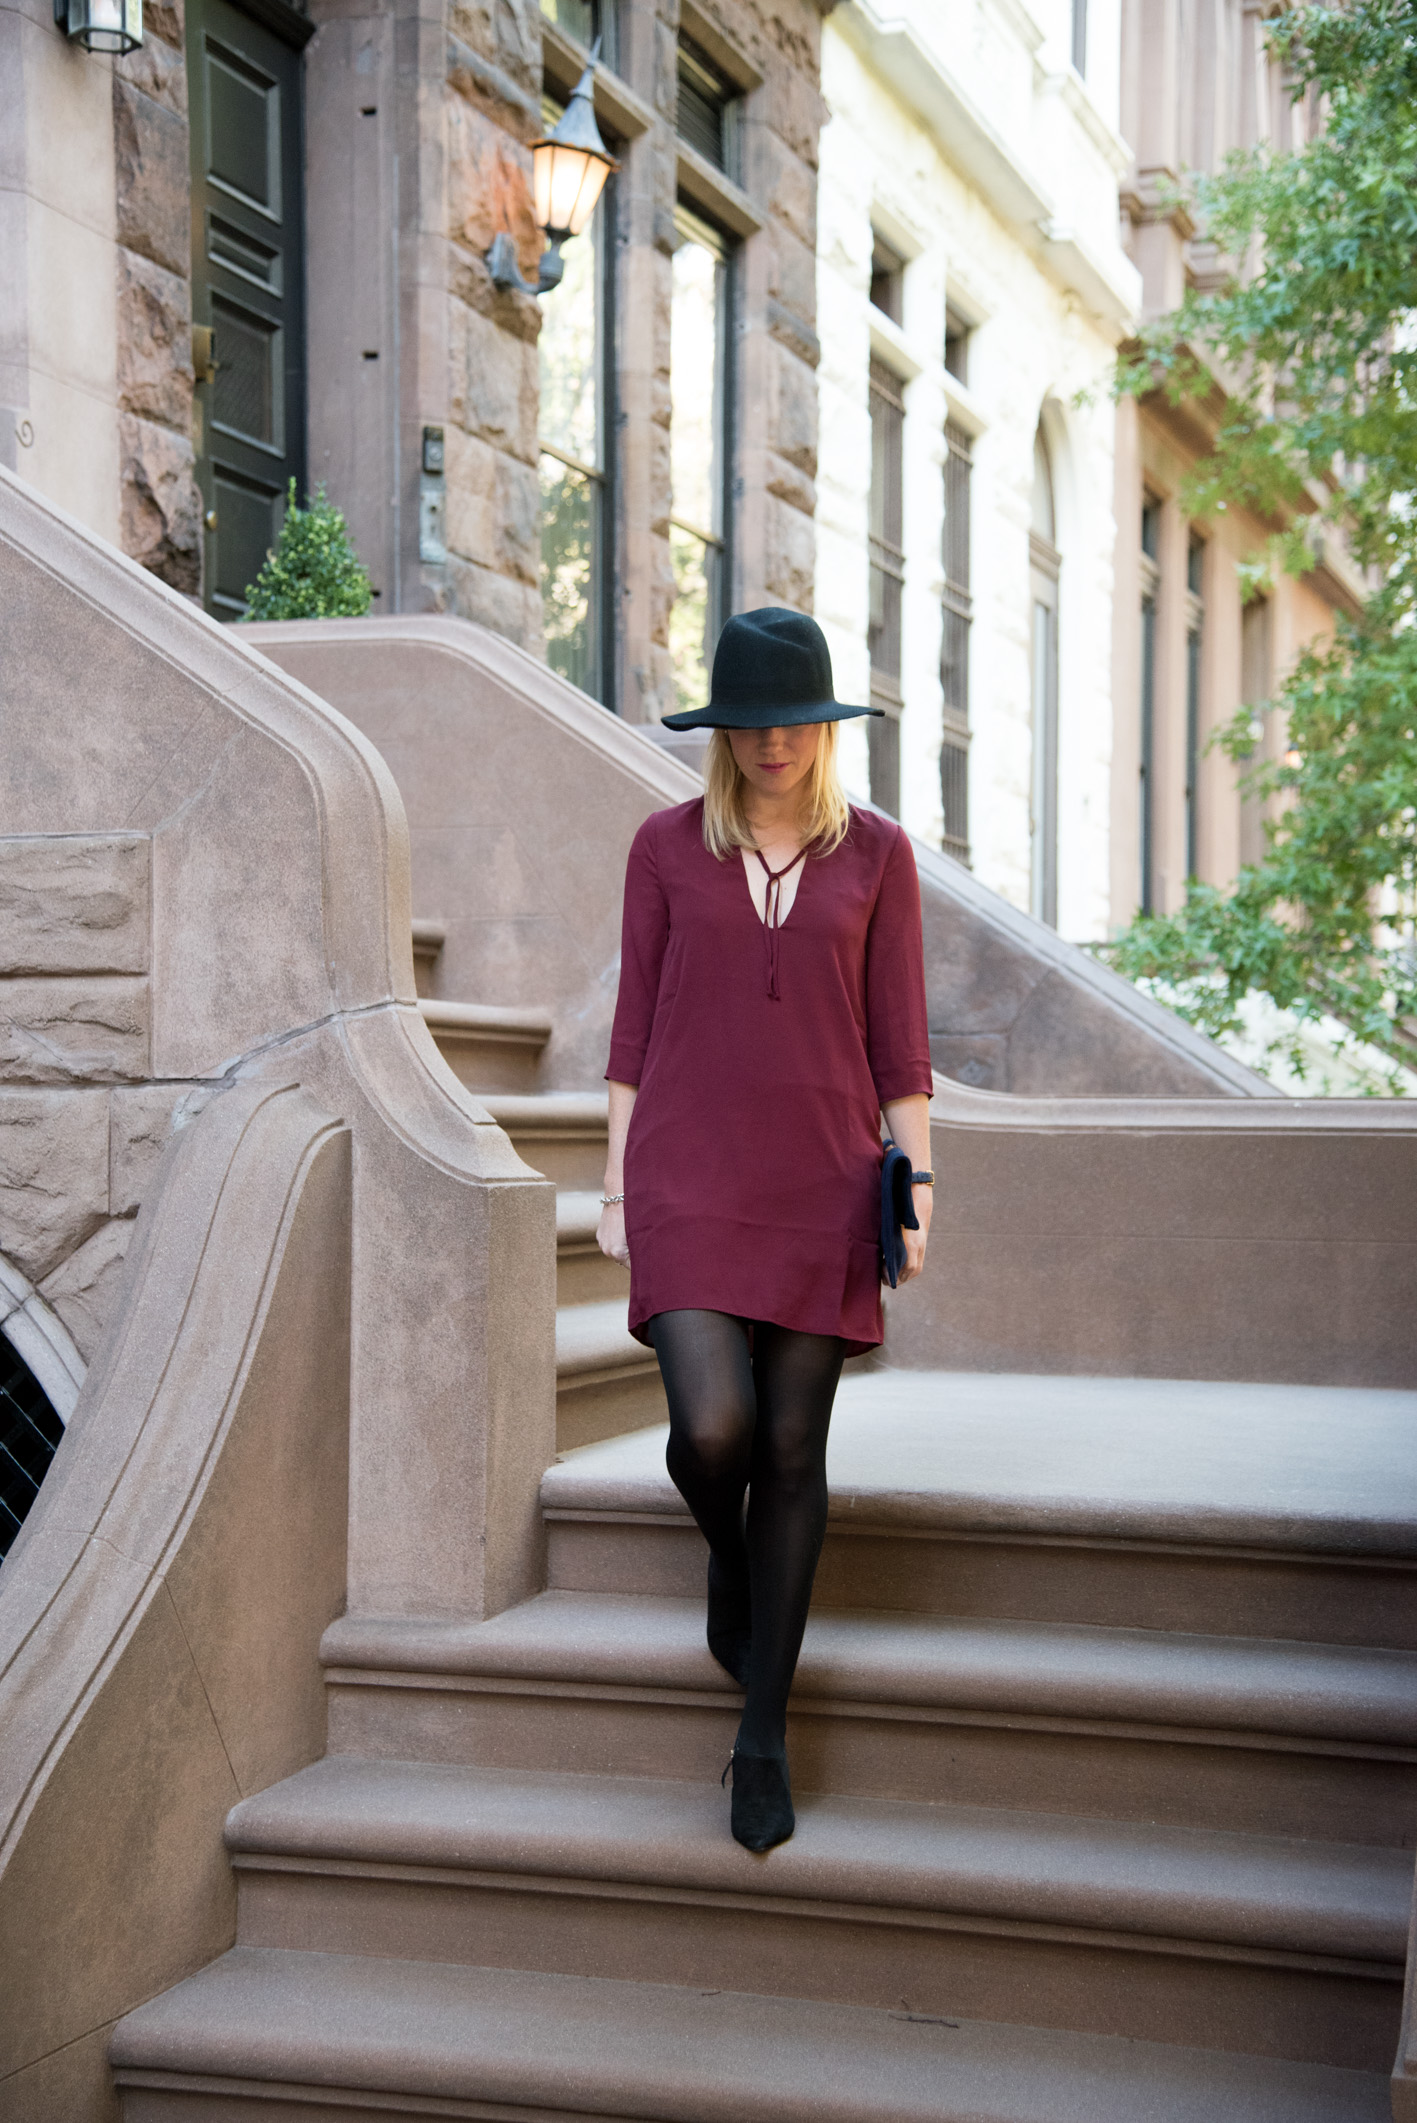 OOTD NYC Fashion Blogger personal style